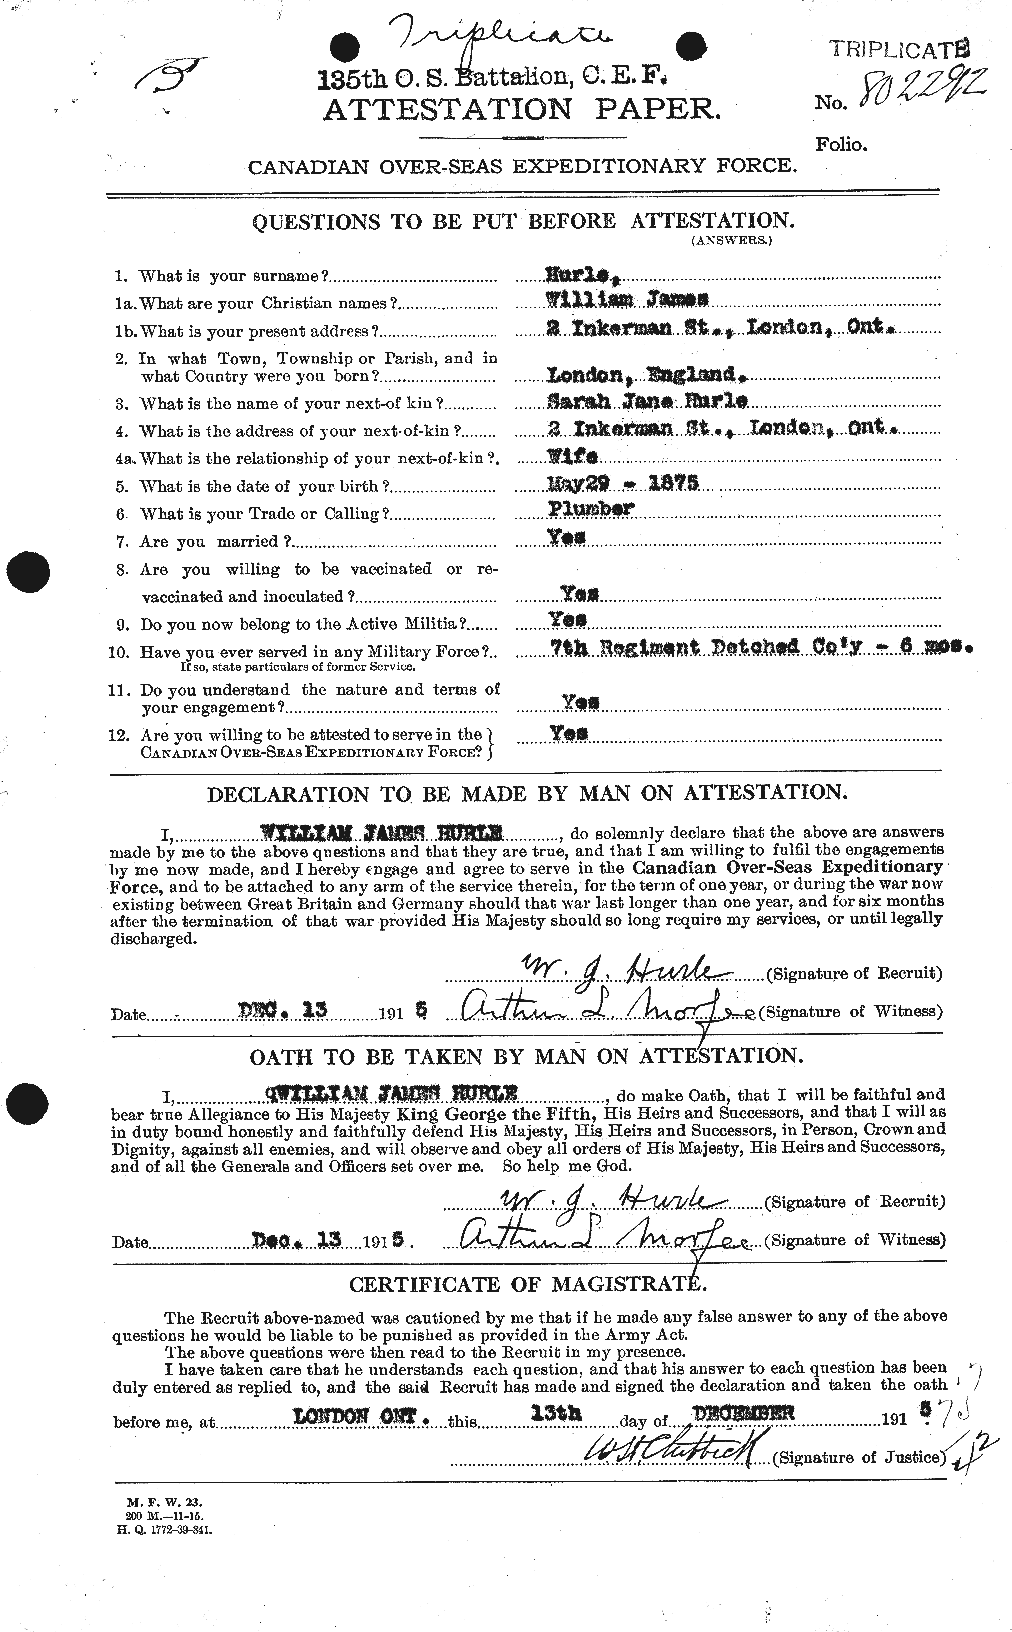 Personnel Records of the First World War - CEF 408527a